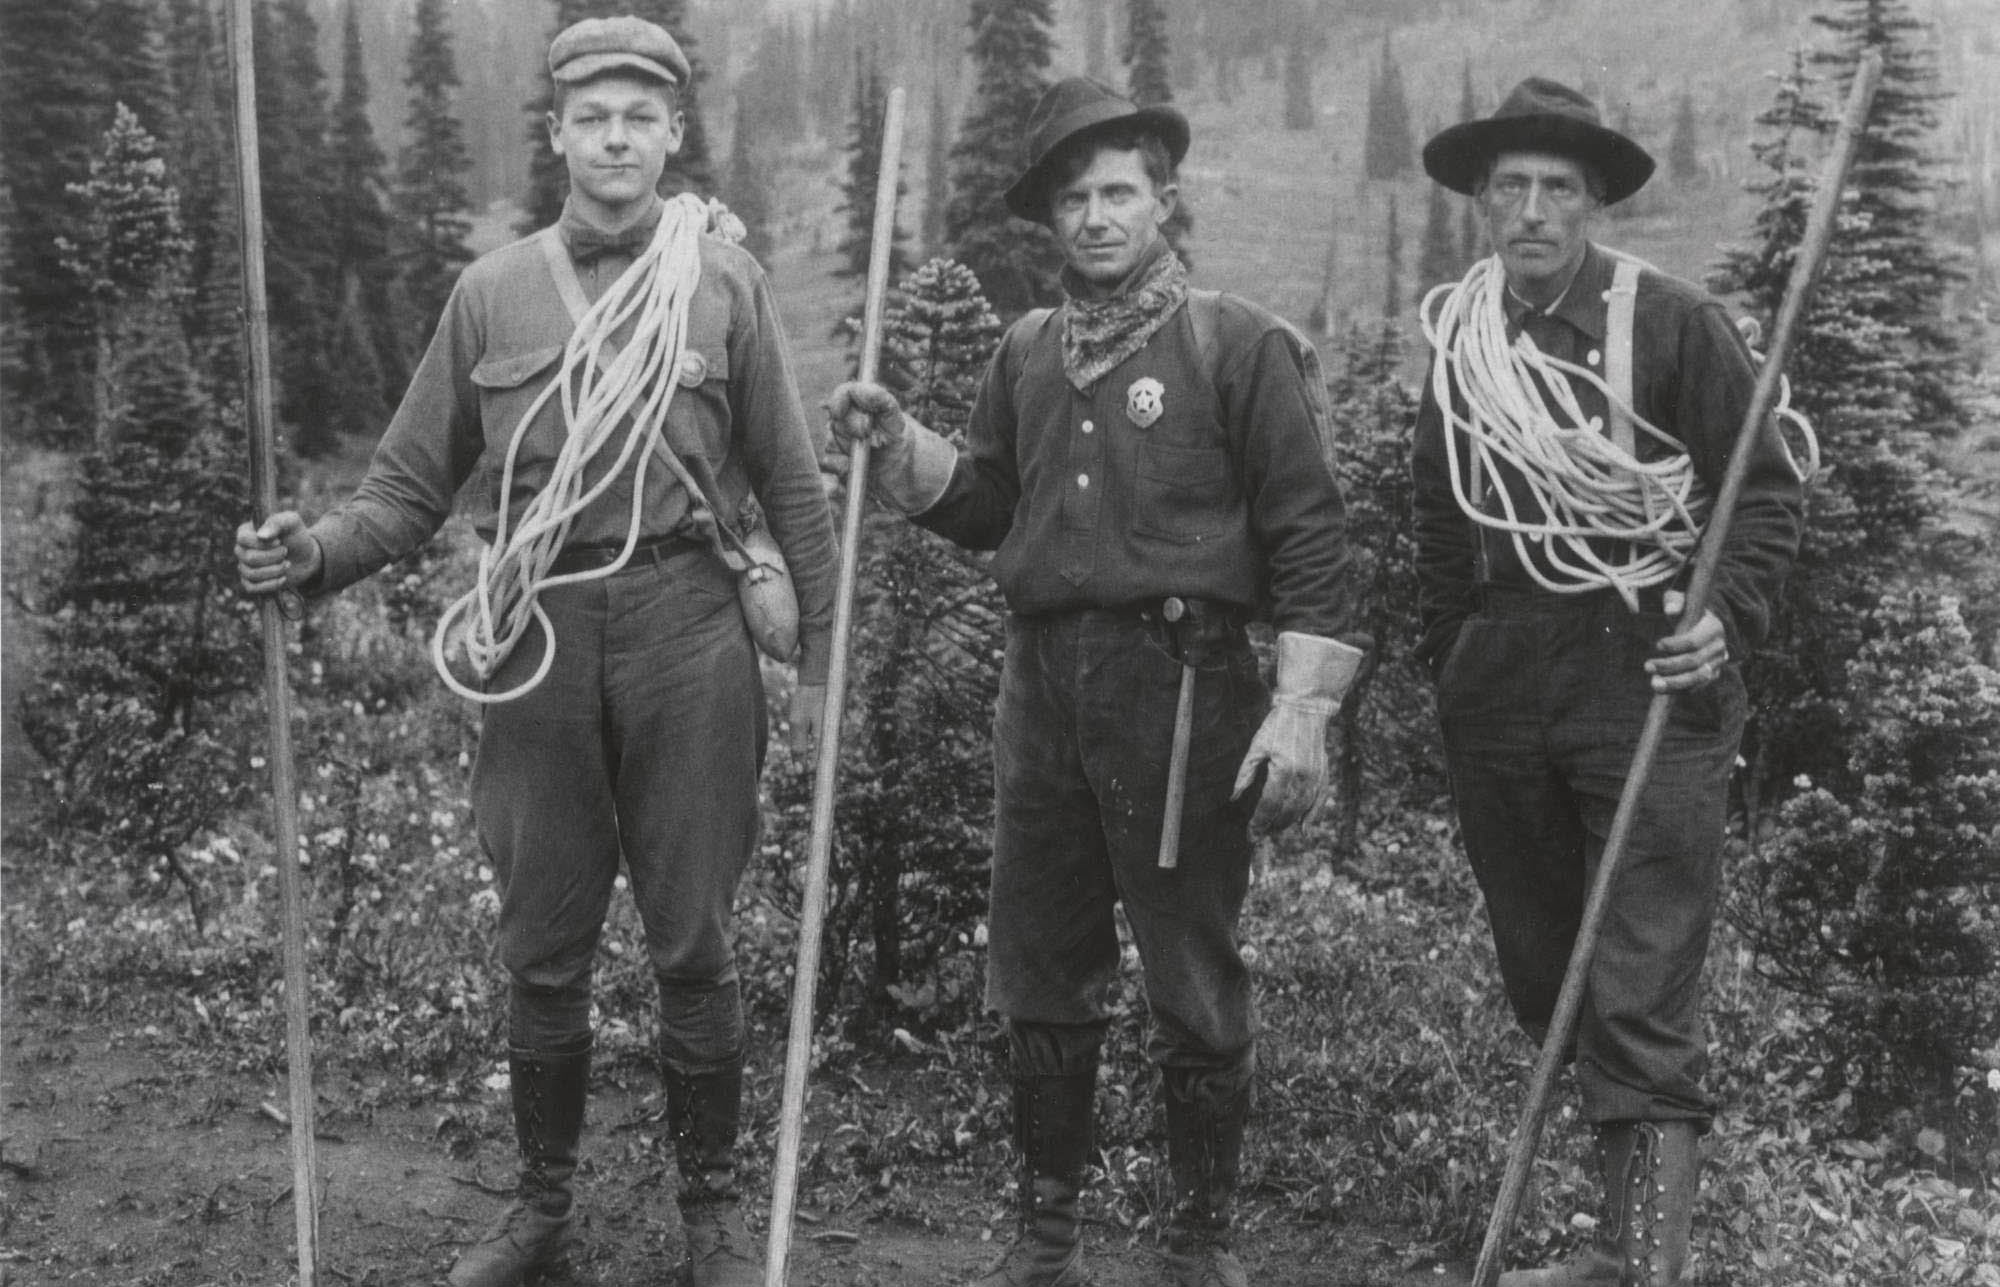 Phil Barrett, Joe Stampfler, and another man carry climbing ropes and walking sticks. Stampfler wears a shield-shaped badge and Barrett a round one.